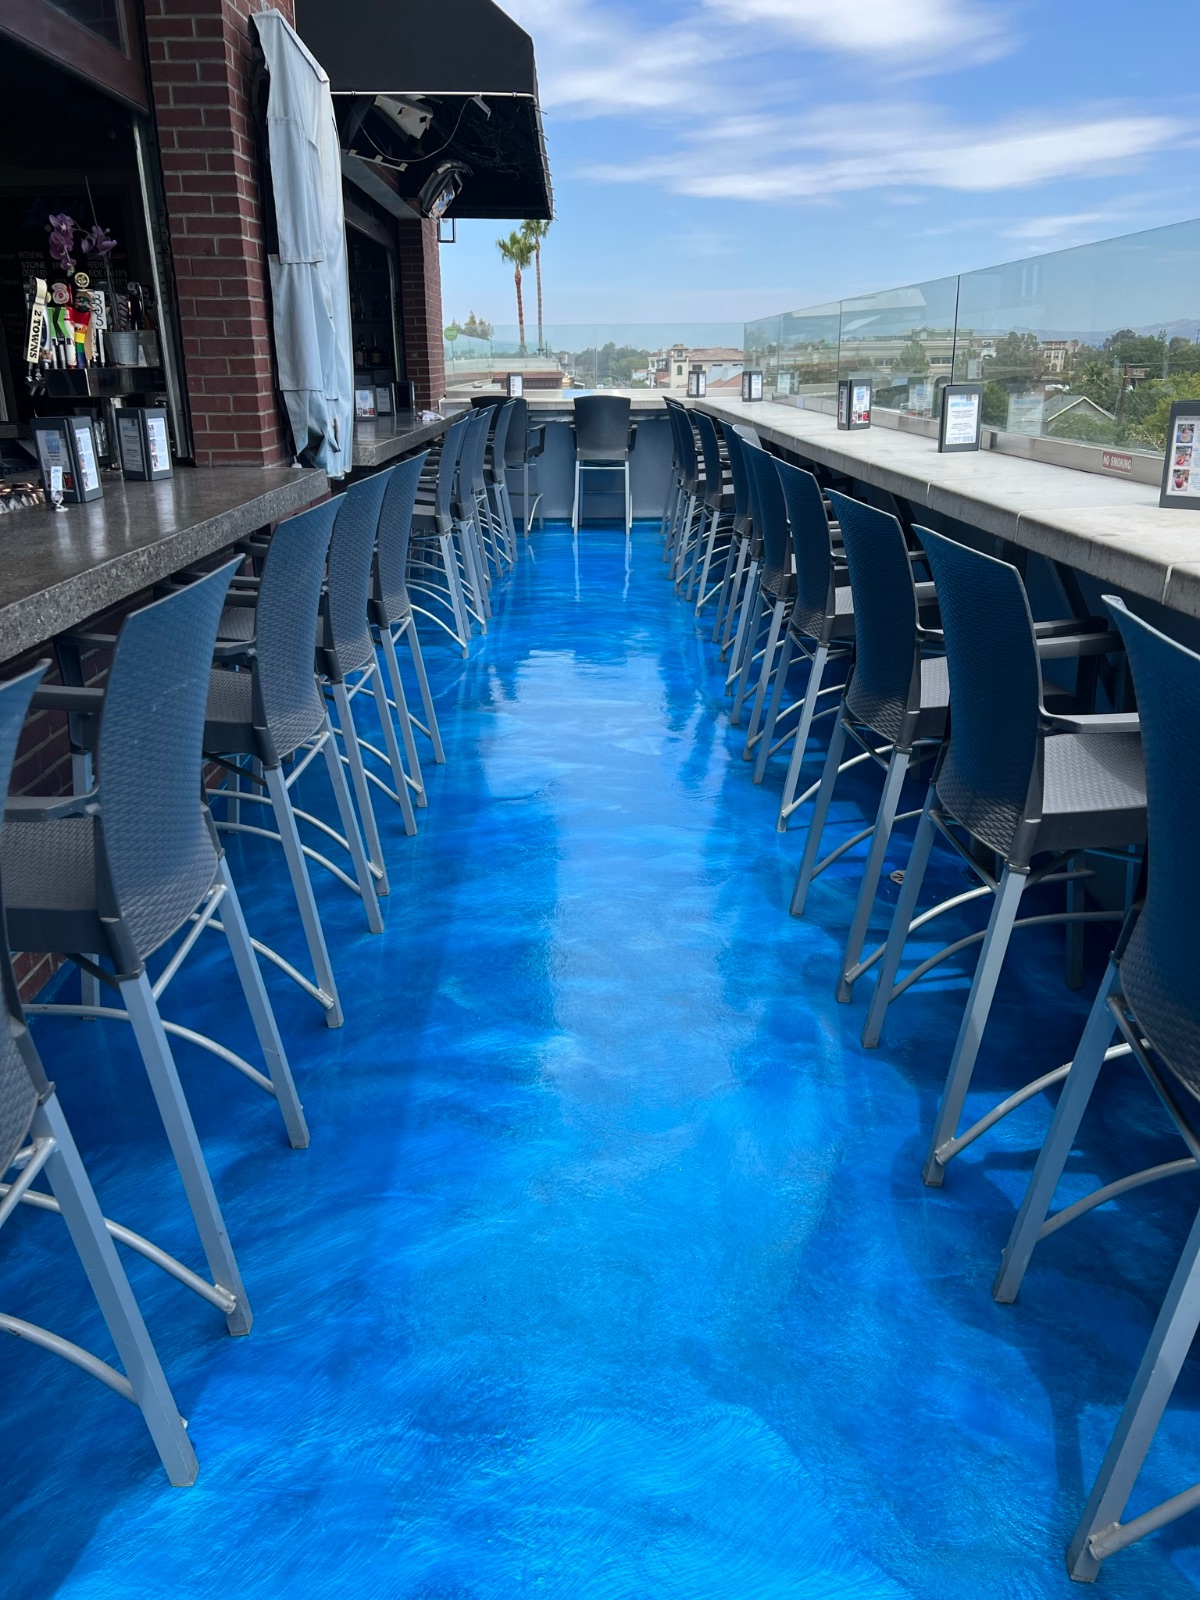 Top Contender in Lava Flow Metallic Epoxy Installation Photo Contest For Customers